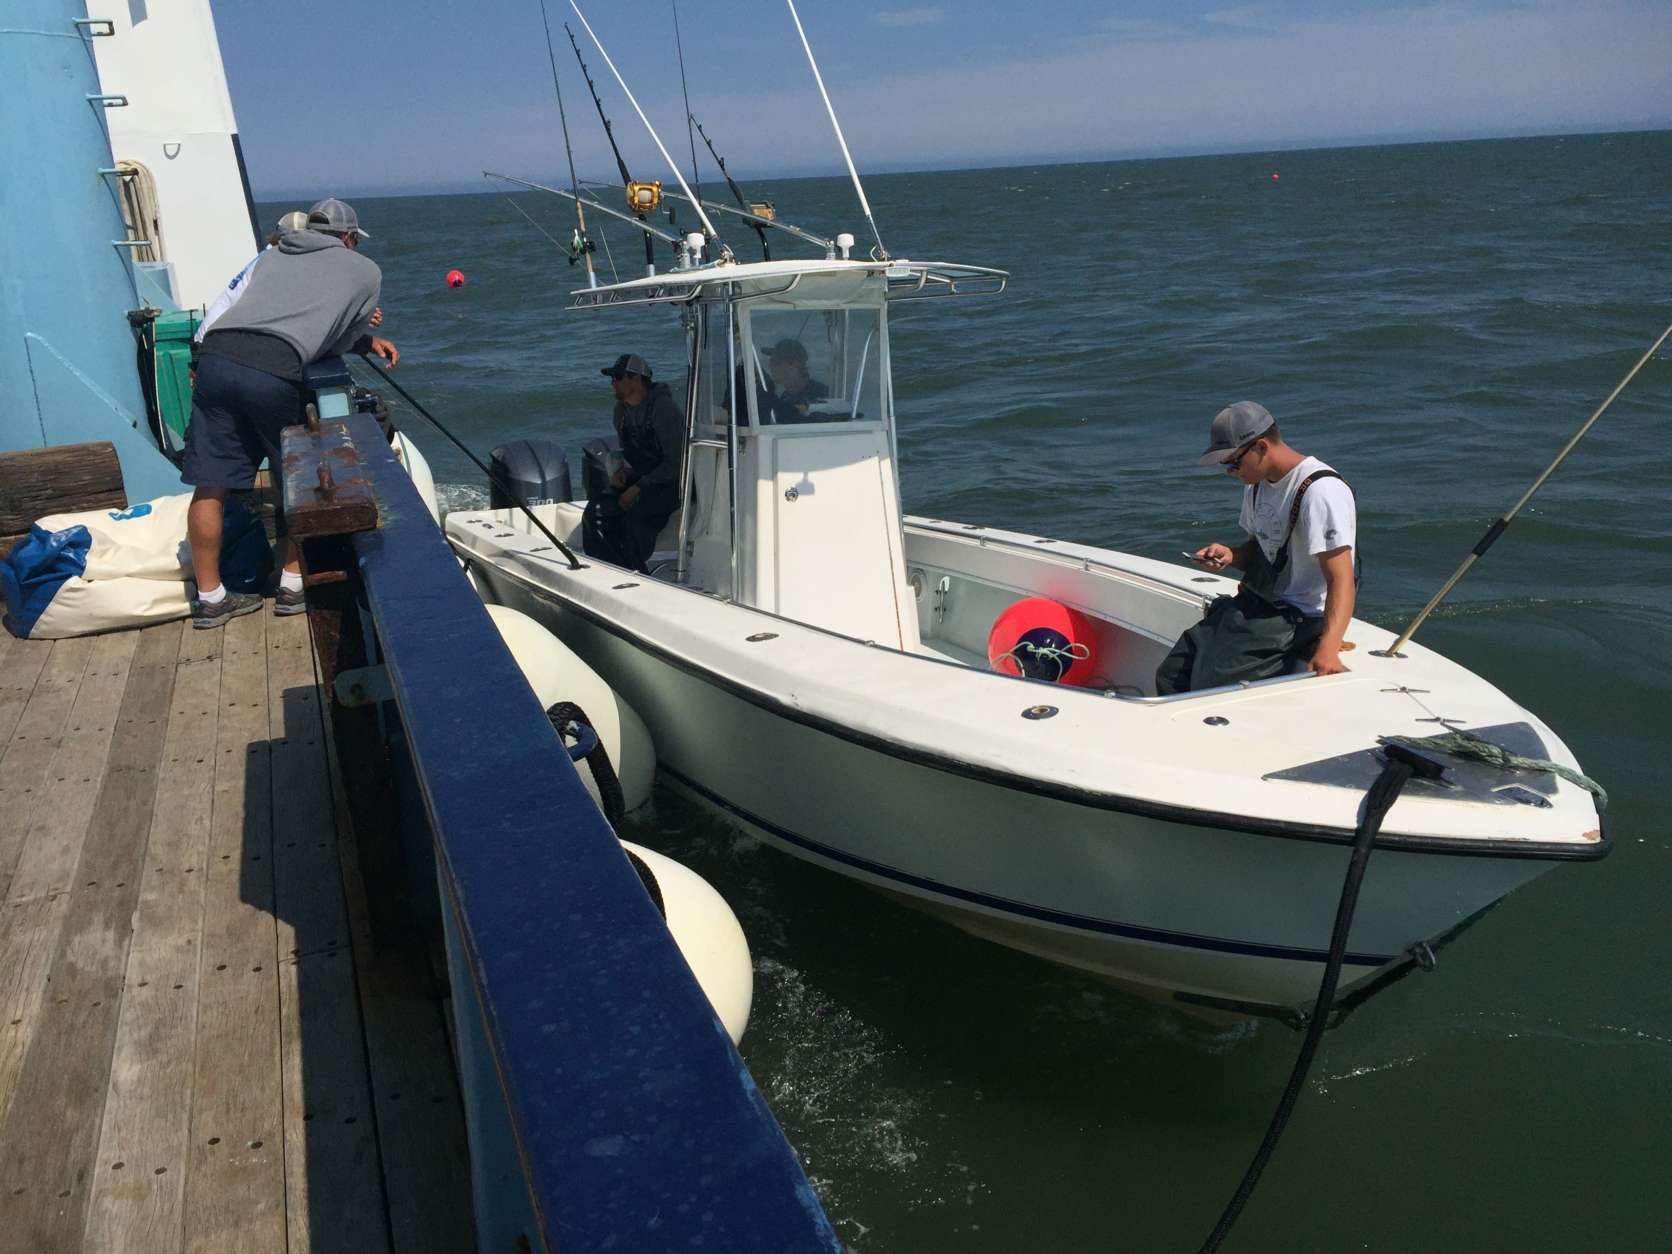 OCEARCH is also the name of the nonprofit group that operates the ship, tags and tracks sharks, and allows researchers access to the fish for study. (WTOP/Michelle Basch)